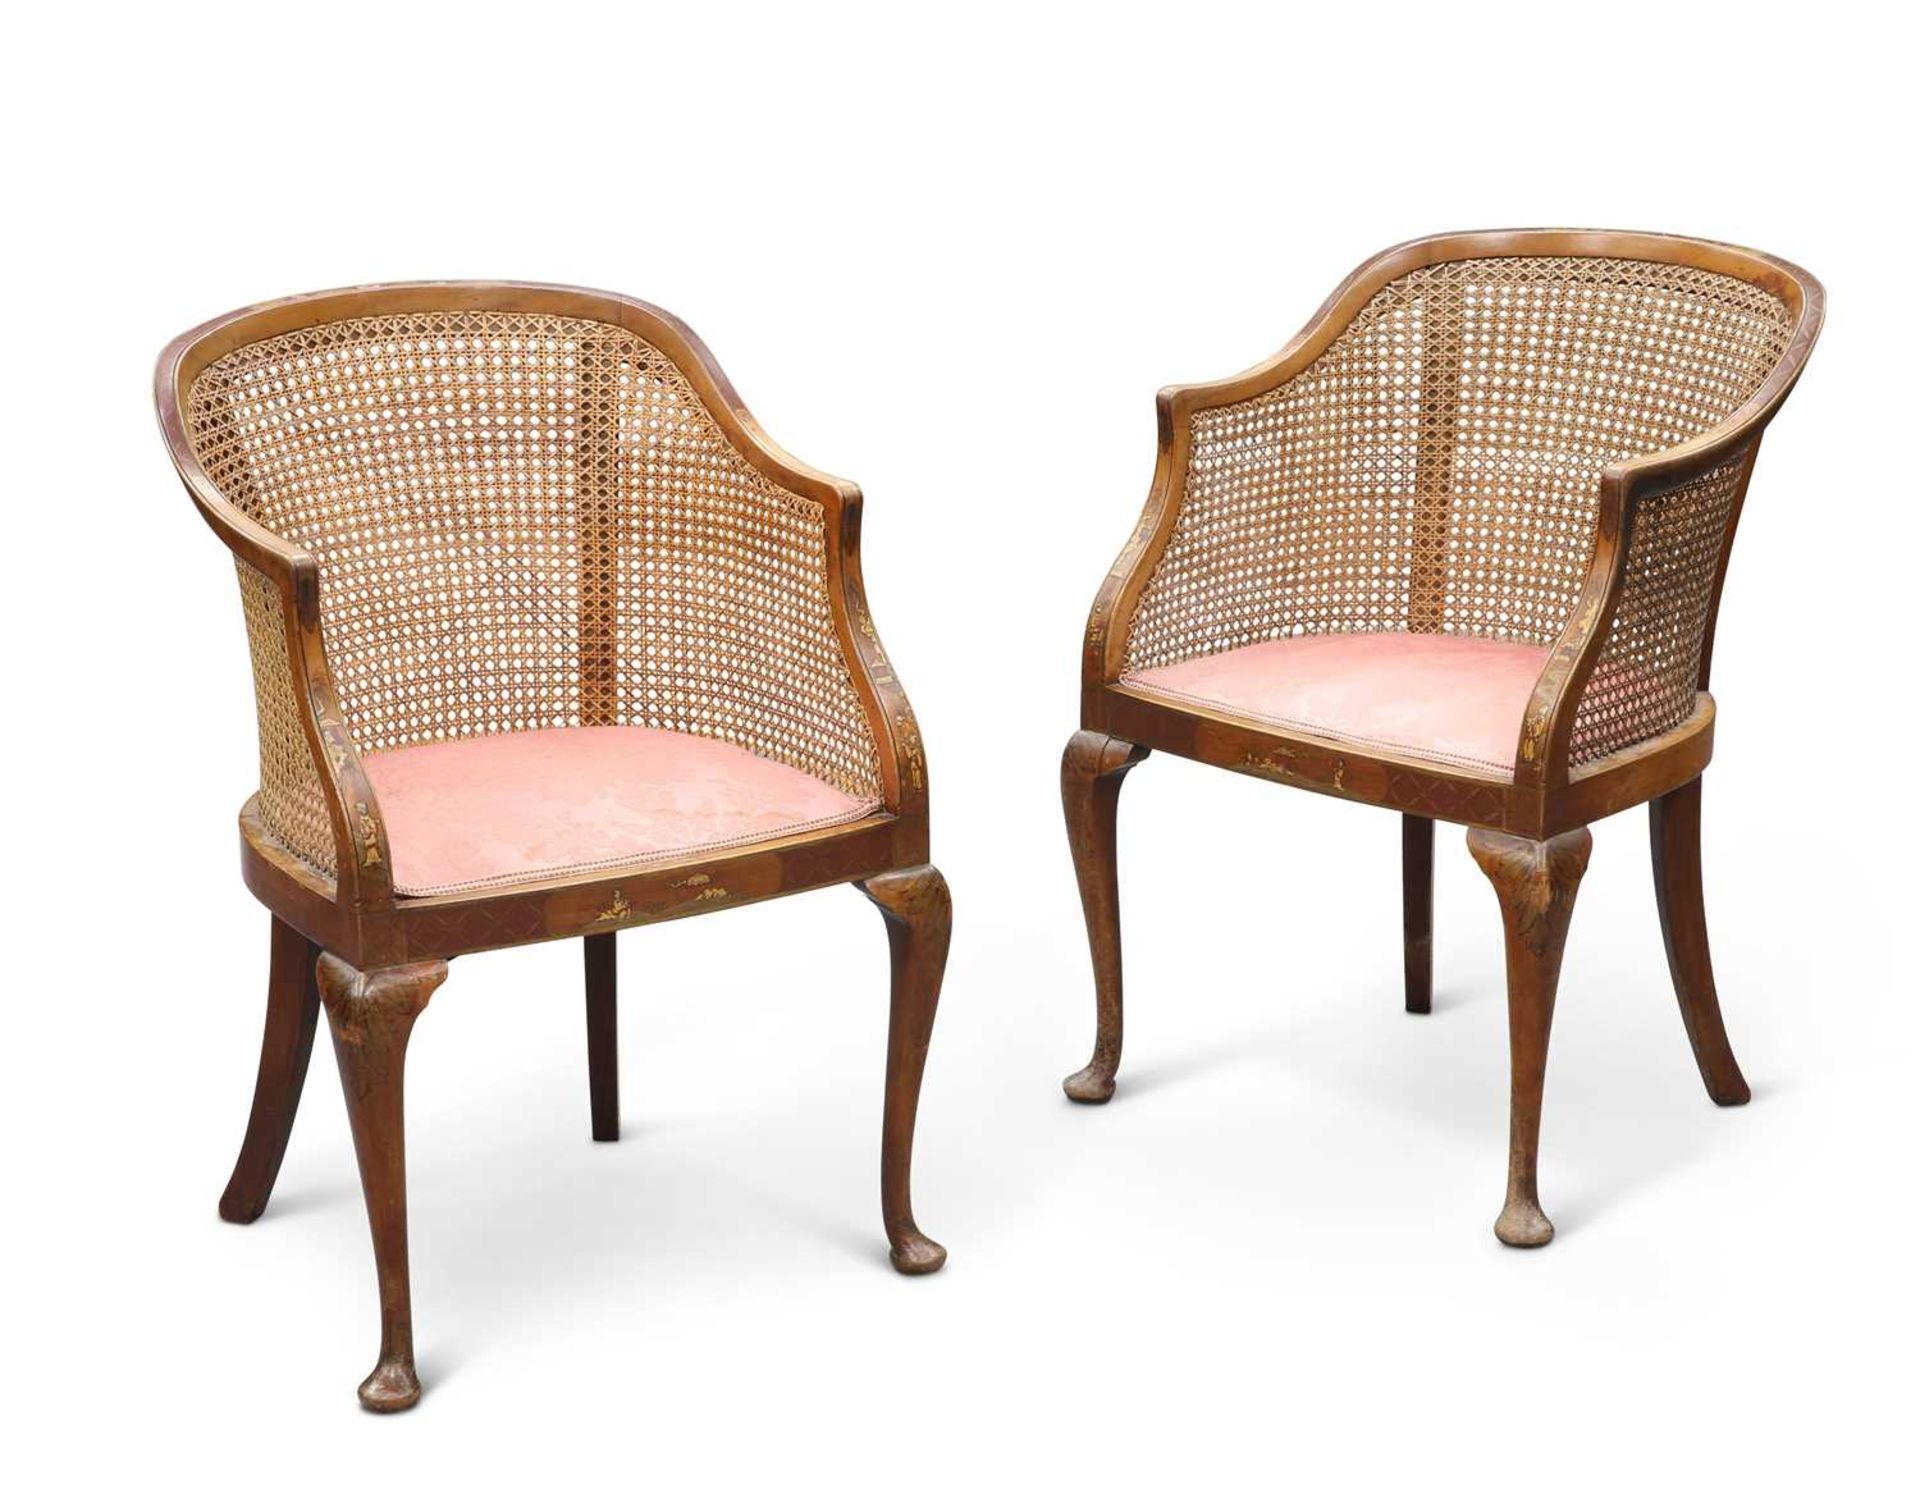 A PAIR OF EARLY 20TH CENTURY CHINOISERIE BERGÈRE ARMCHAIRS